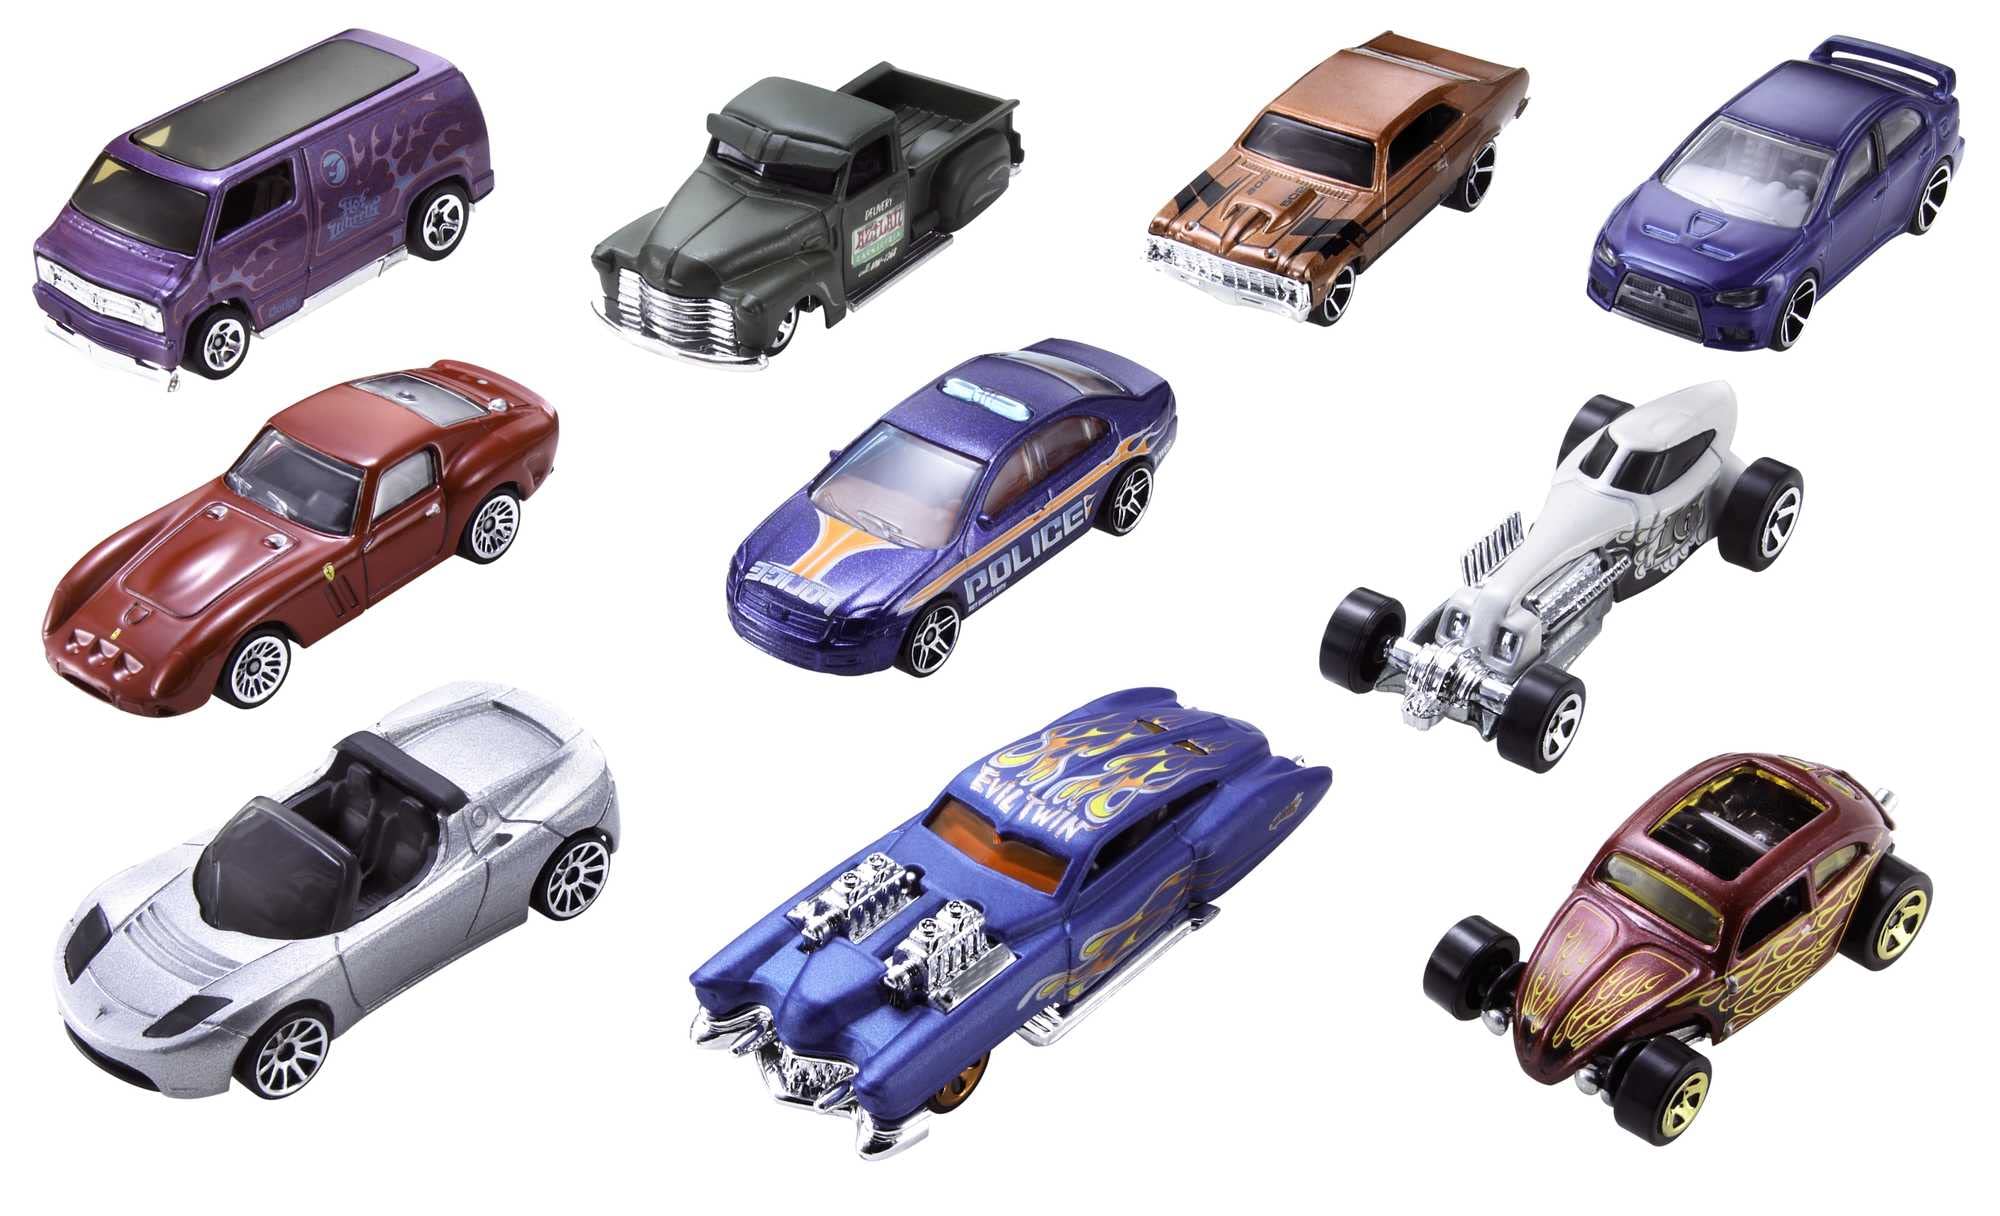 Hot Wheels Set Of 10 1:64 Scale Toy Trucks And Cars For Kids And Collectors (Styles May Vary) [Amazon Exclusive]